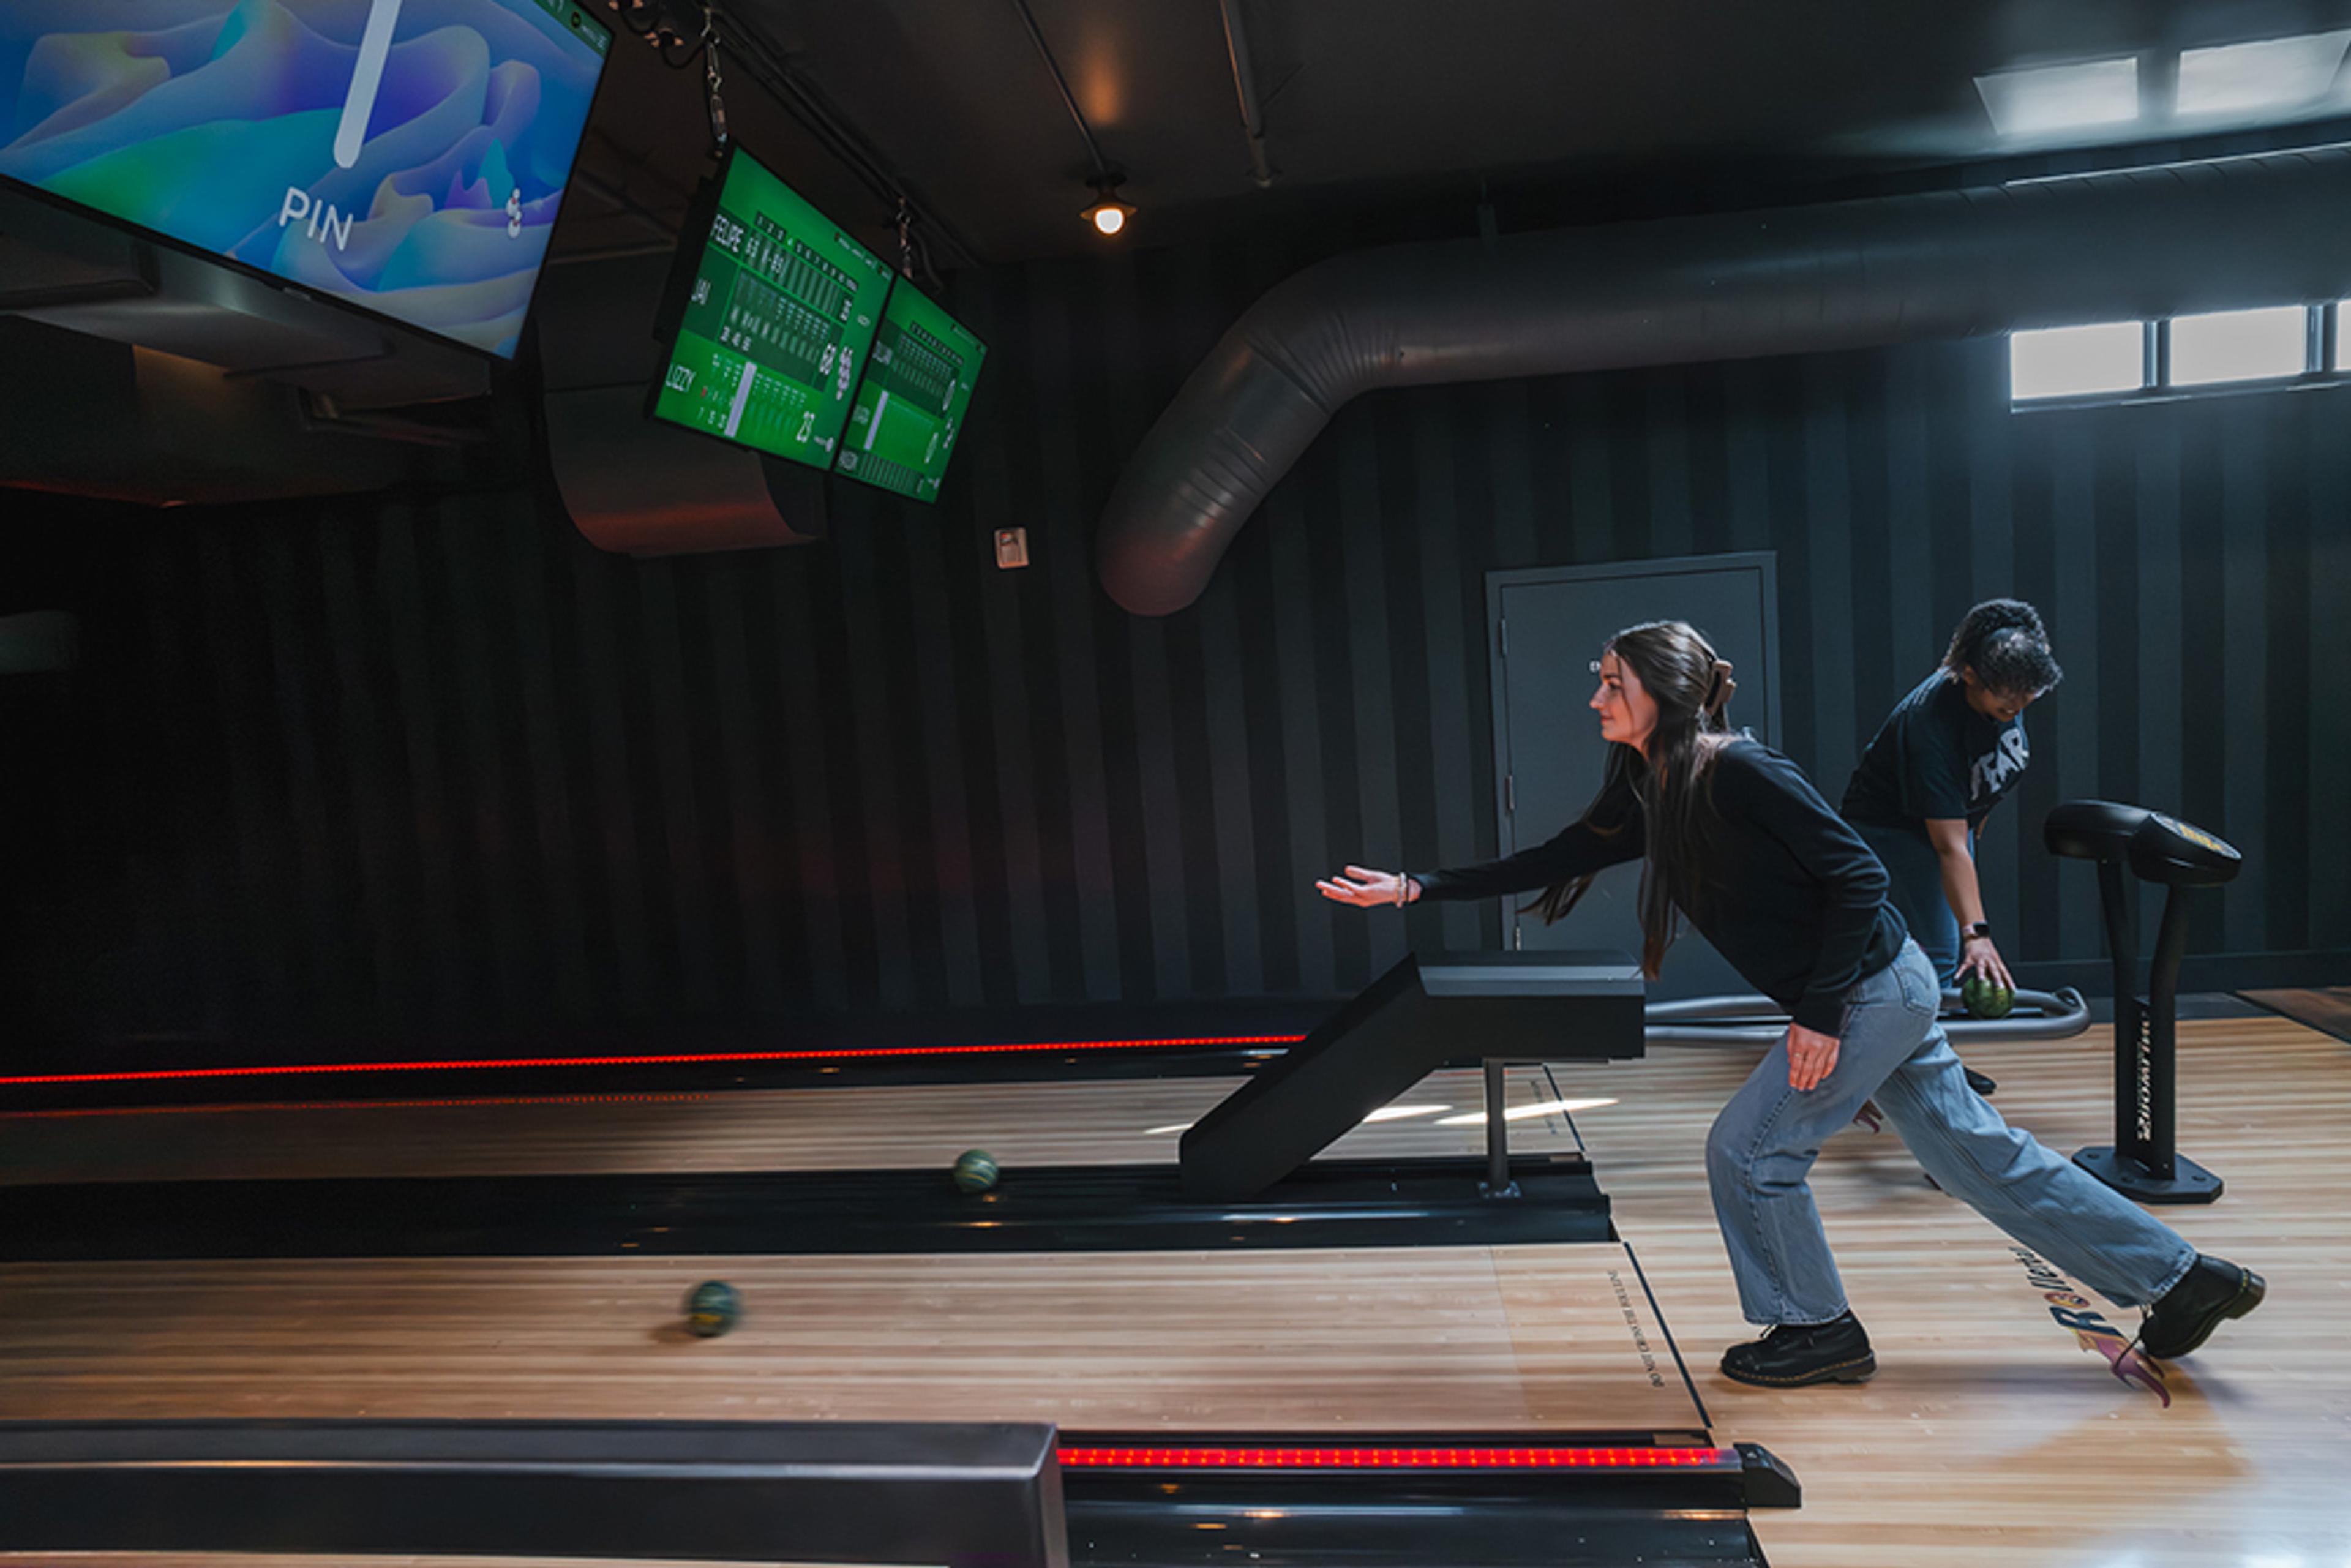 Young woman rolling a ball on bowling lane